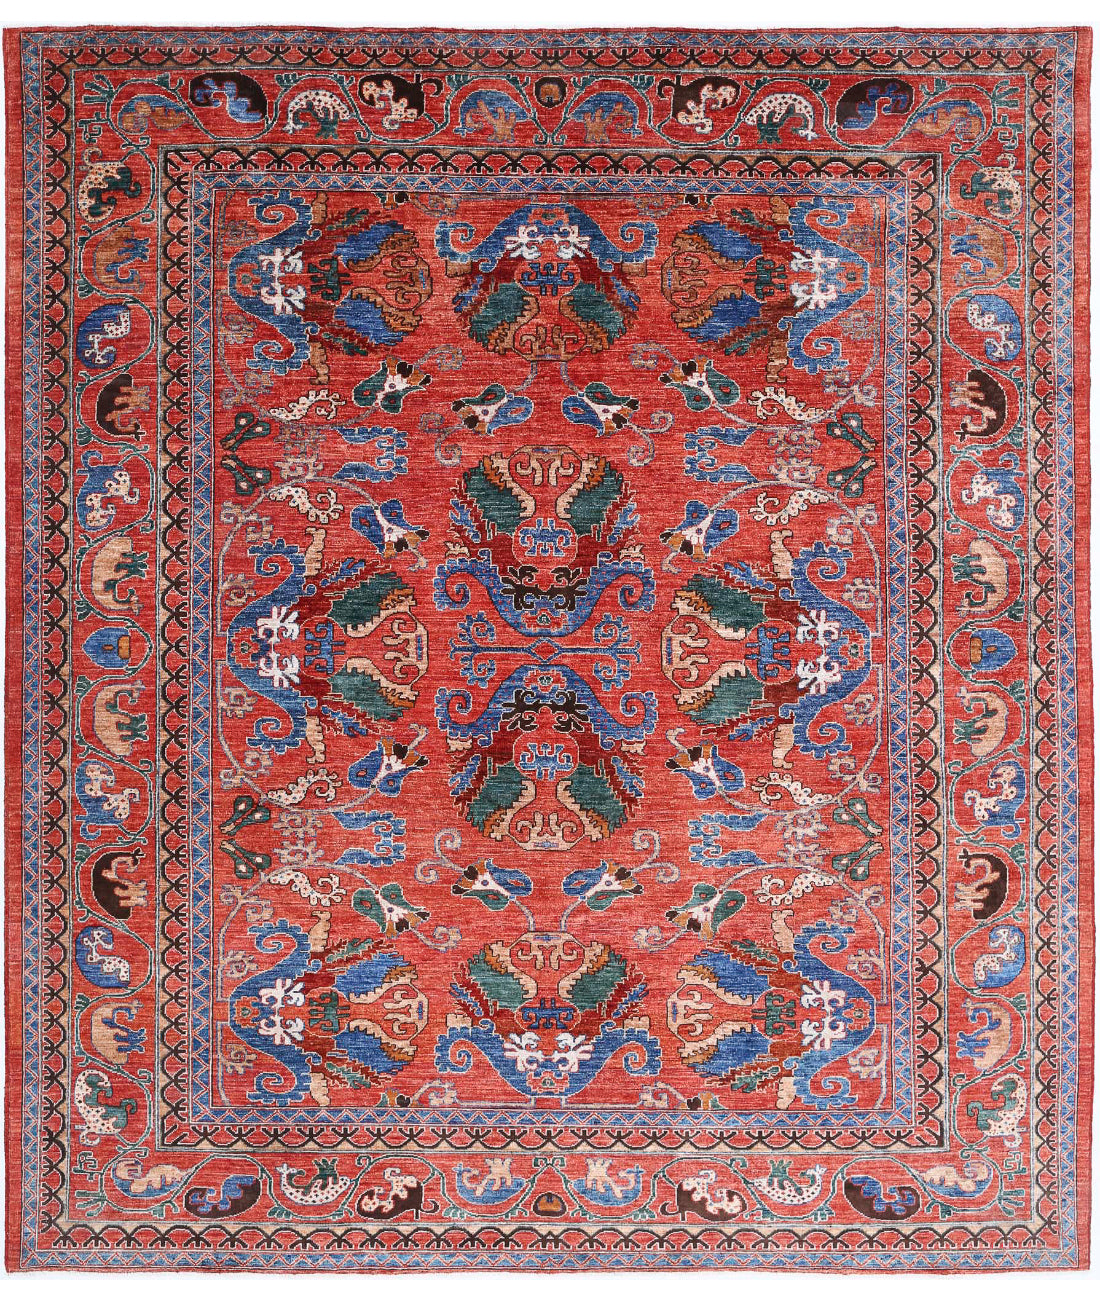 Hand Knotted Nomadic Caucasian Humna Wool Rug - 8'7'' x 9'9'' 8'7'' x 9'9'' (258 X 293) / Red / Blue